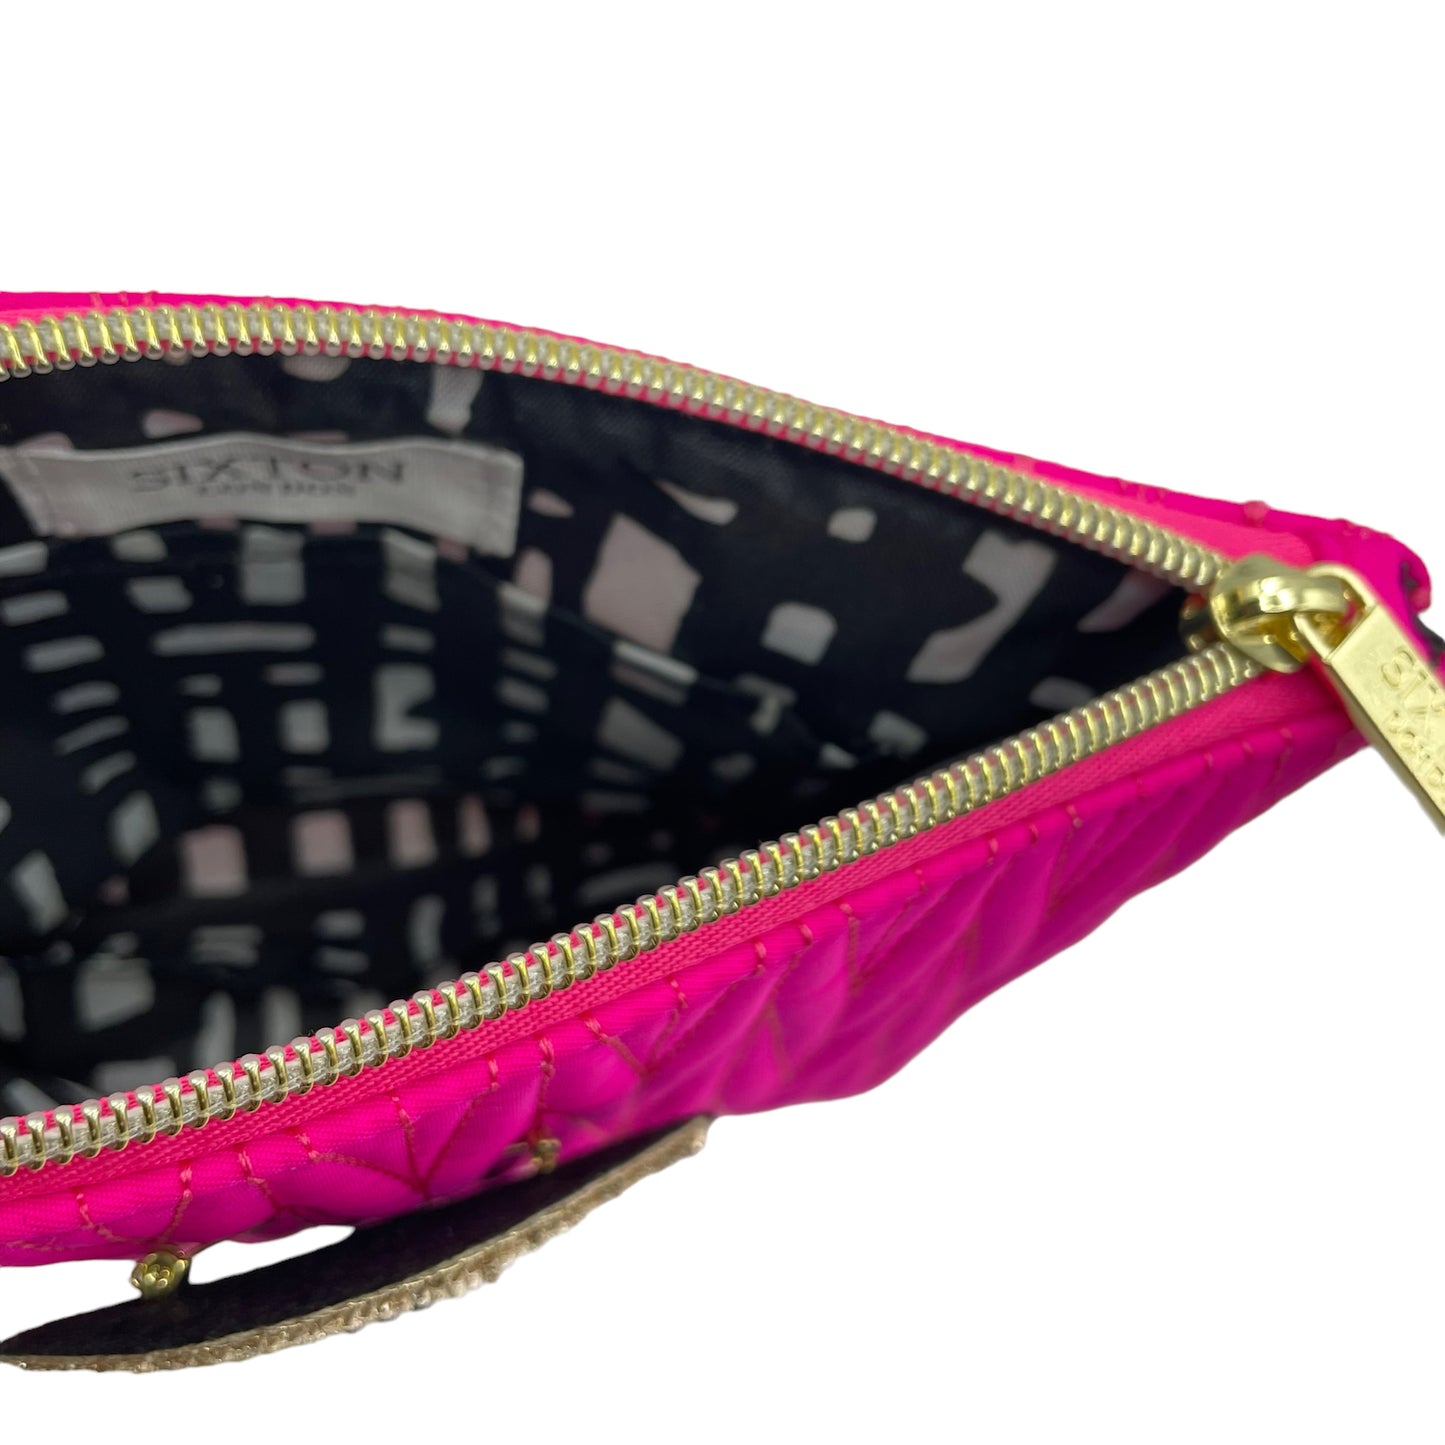 Bright pink Tribeca make up bag with a golden eye pin